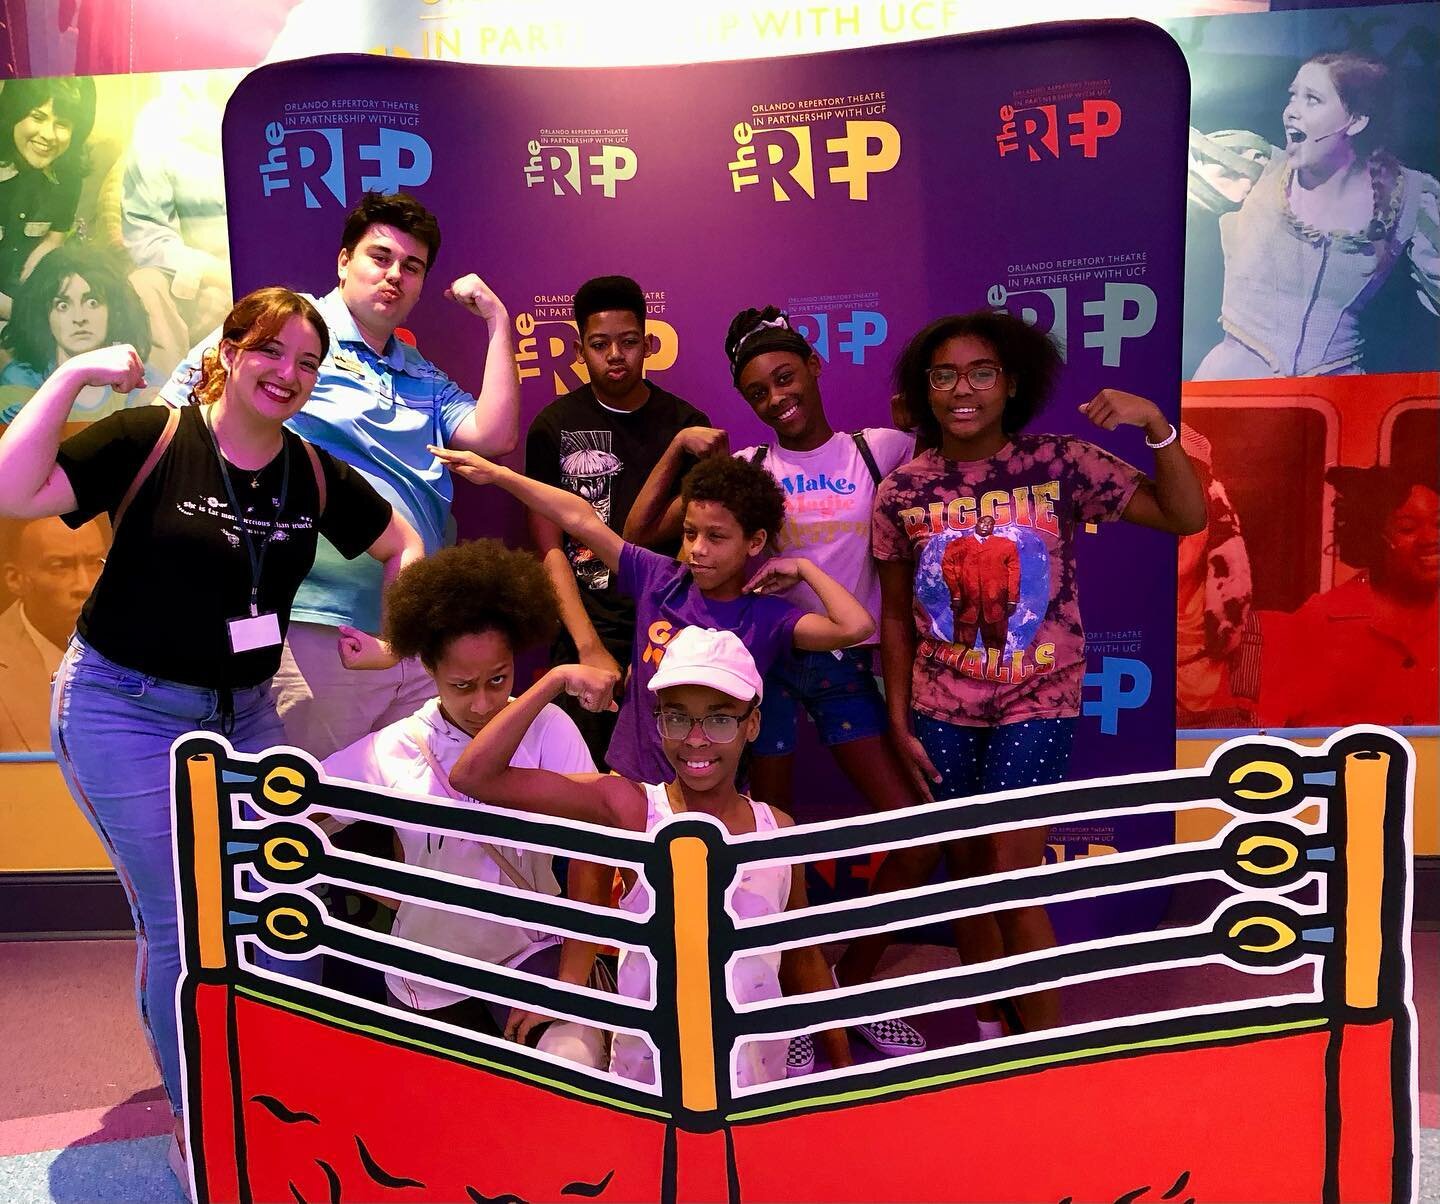 Warhol &amp; Wrestling? 
Lichtenstein &amp; Luchdora?
Yes - Youth from Orlando Union Rescue Mission and Great Oaks Village toured a printmaking exhibit and saw art created by pop artists Andy Warhol and Roy Lichtenstein. They also learned about engra